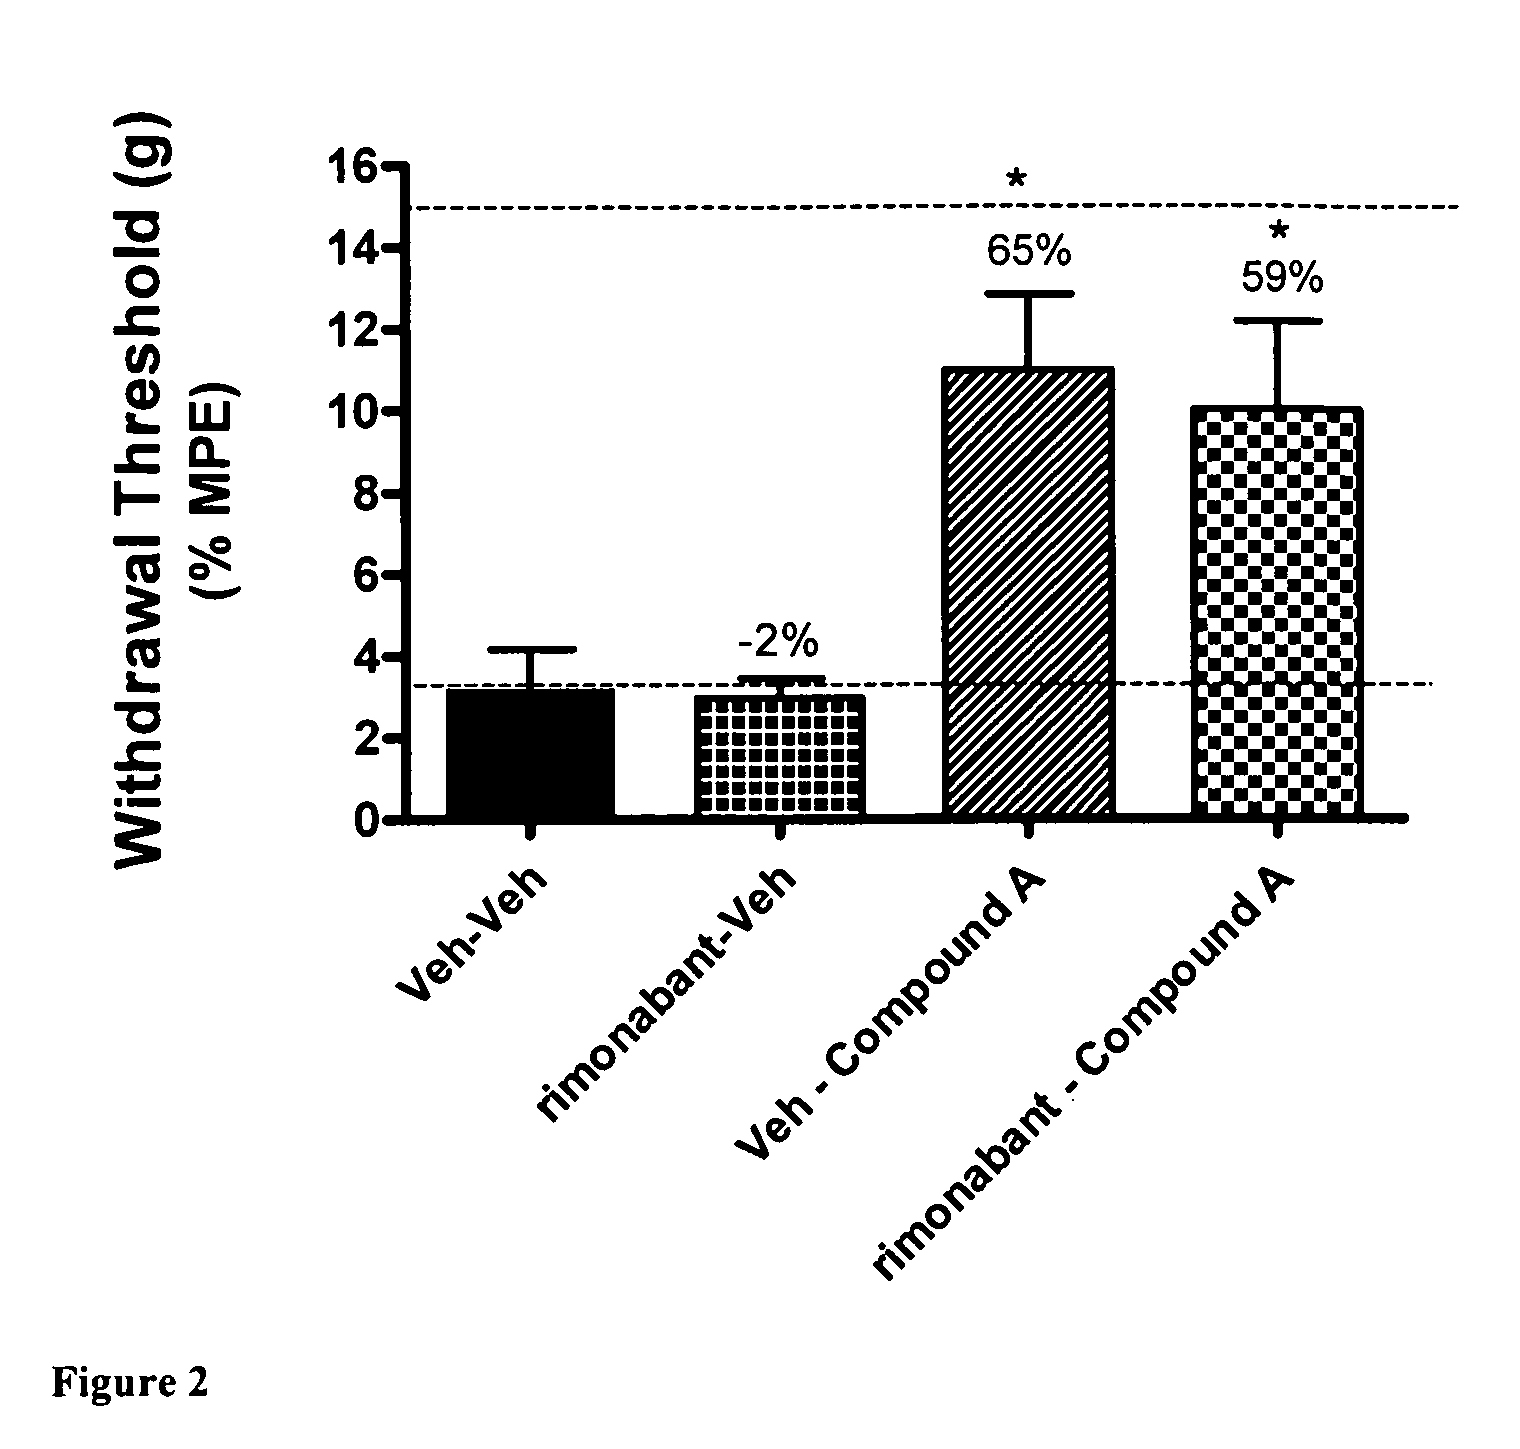 Method for reducing side effects of CB2 receptor agonist therapy using a combination of a selective CB2 receptor agonist and a selective CB1 receptor antagonist